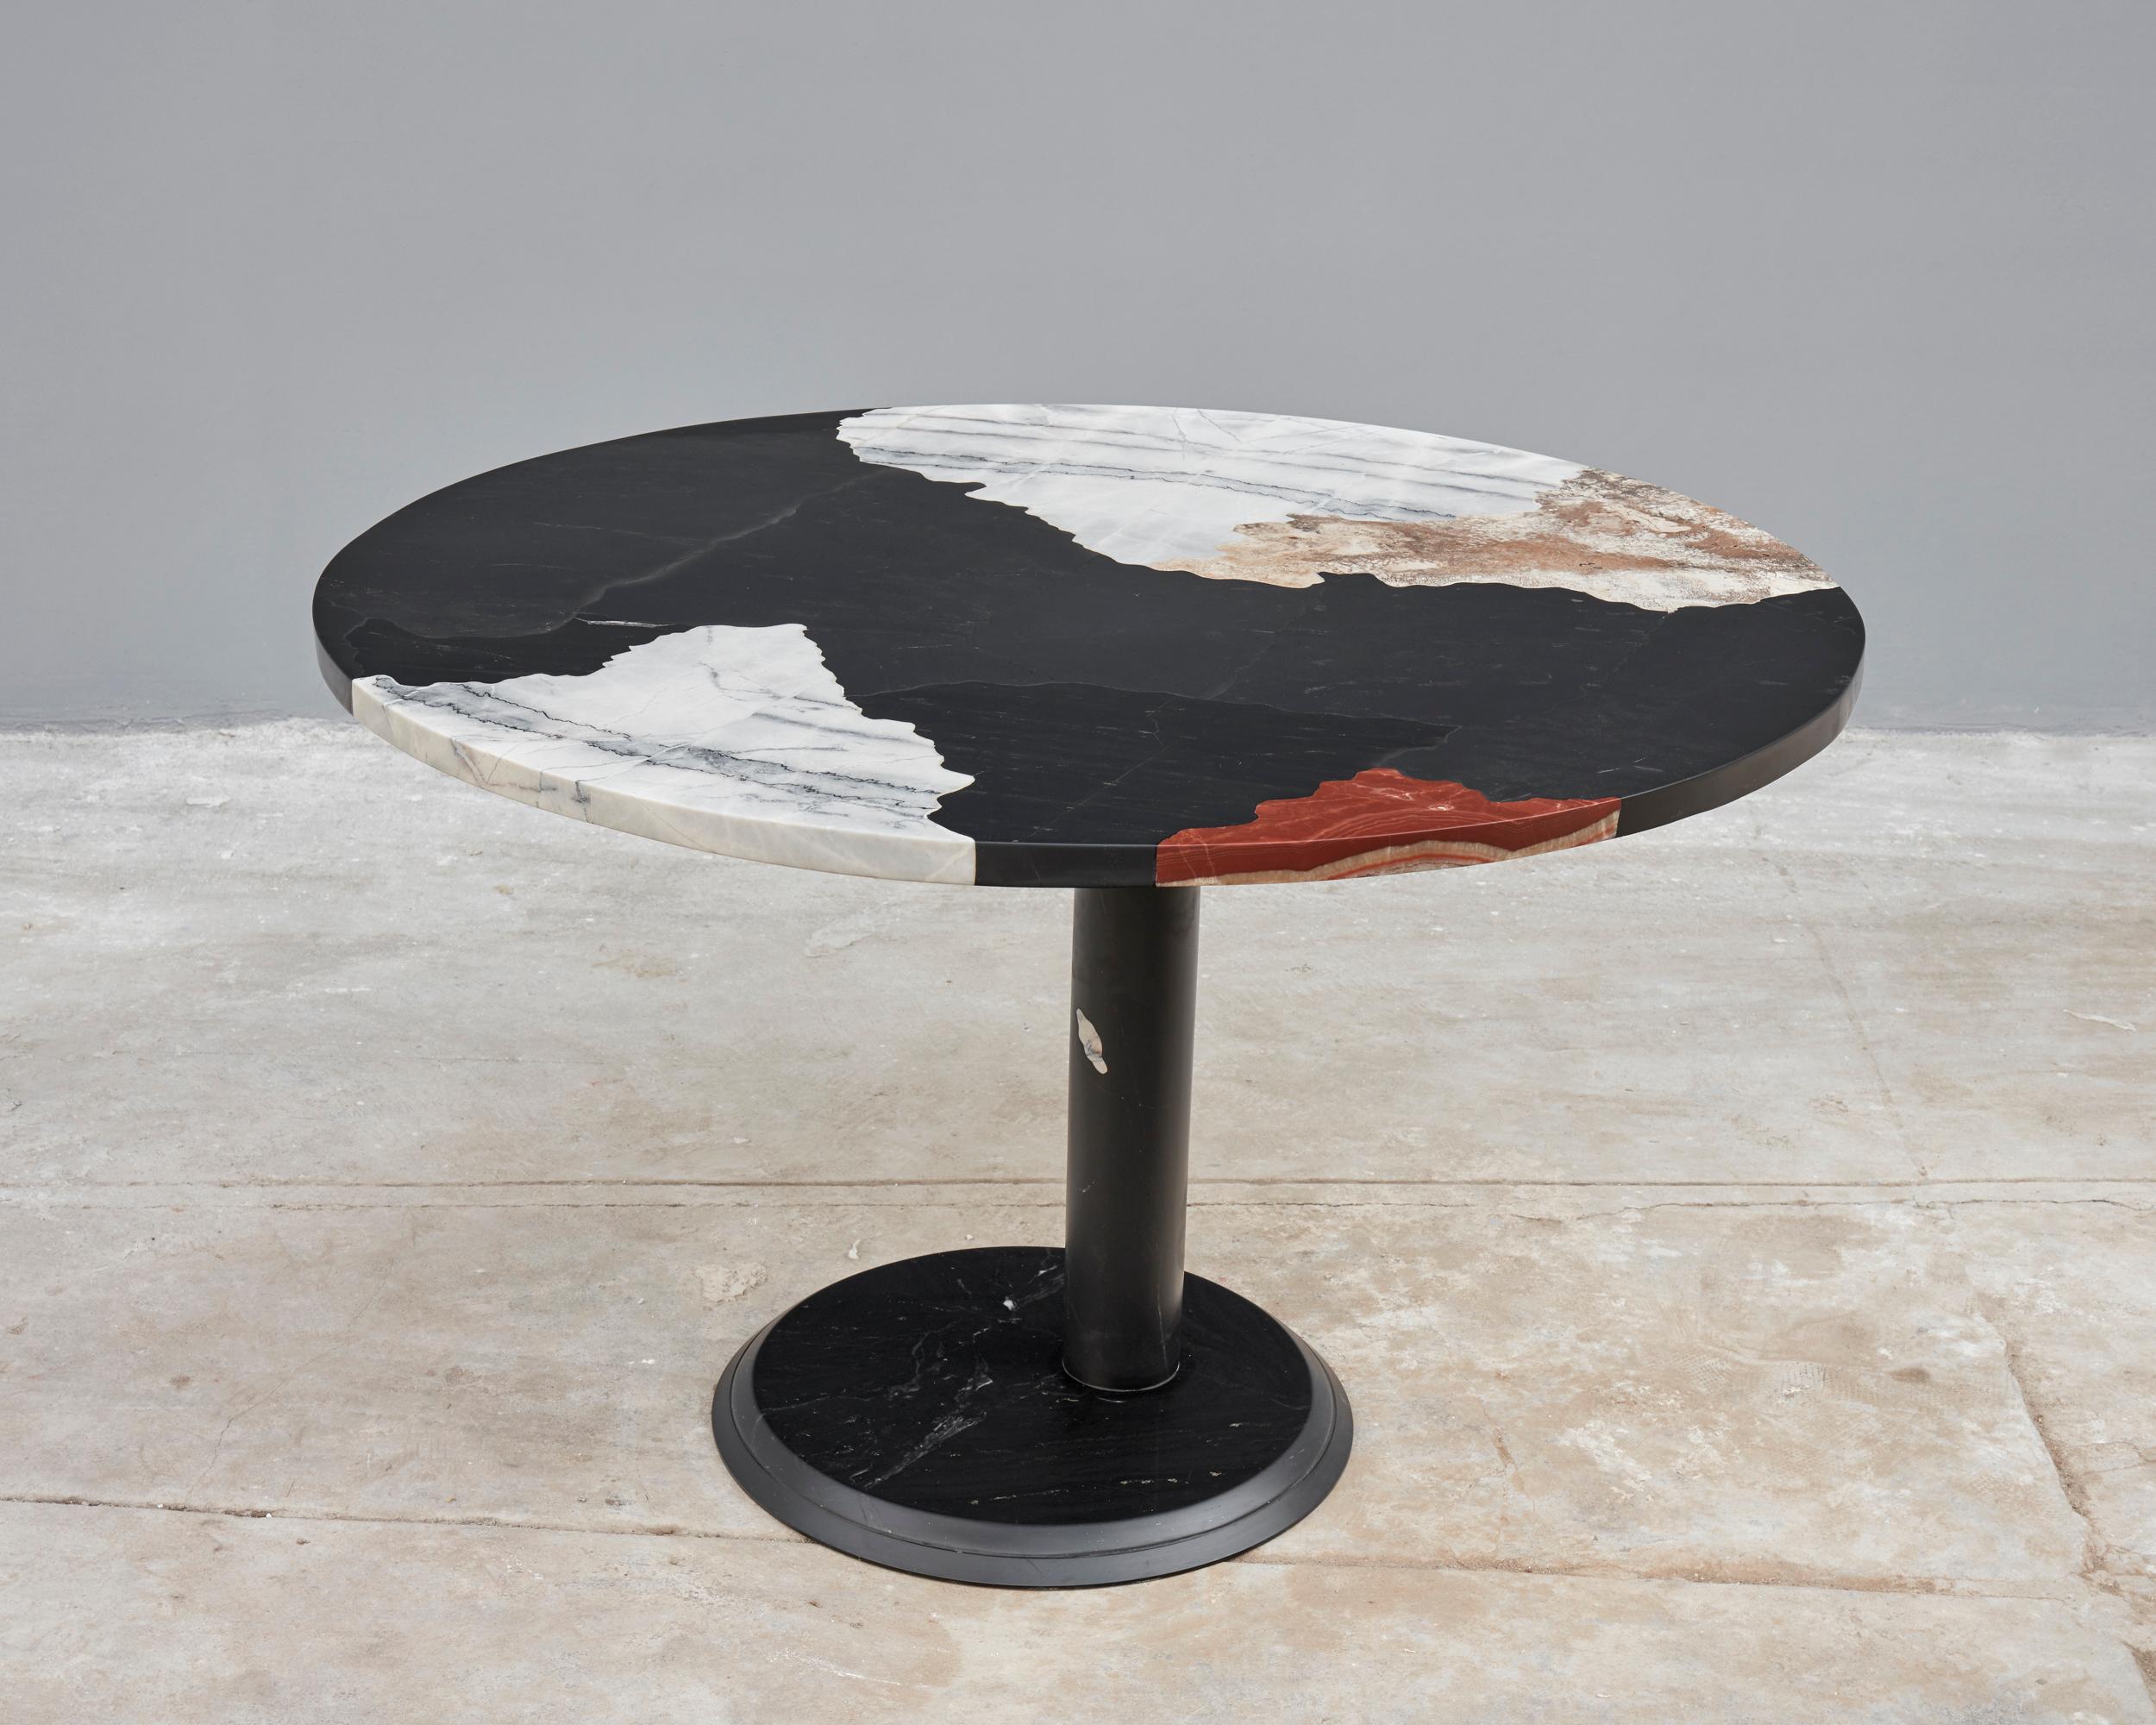 Soil map N°4 table by Estudio Rafael Freyre.
Dimensions: D 120 x H 80 cm. 
Materials: diverse recycled andes stones.

The pieces in the soil map series are part of a quest to bring our bodies closer to the geography we inhabit, to the mineral